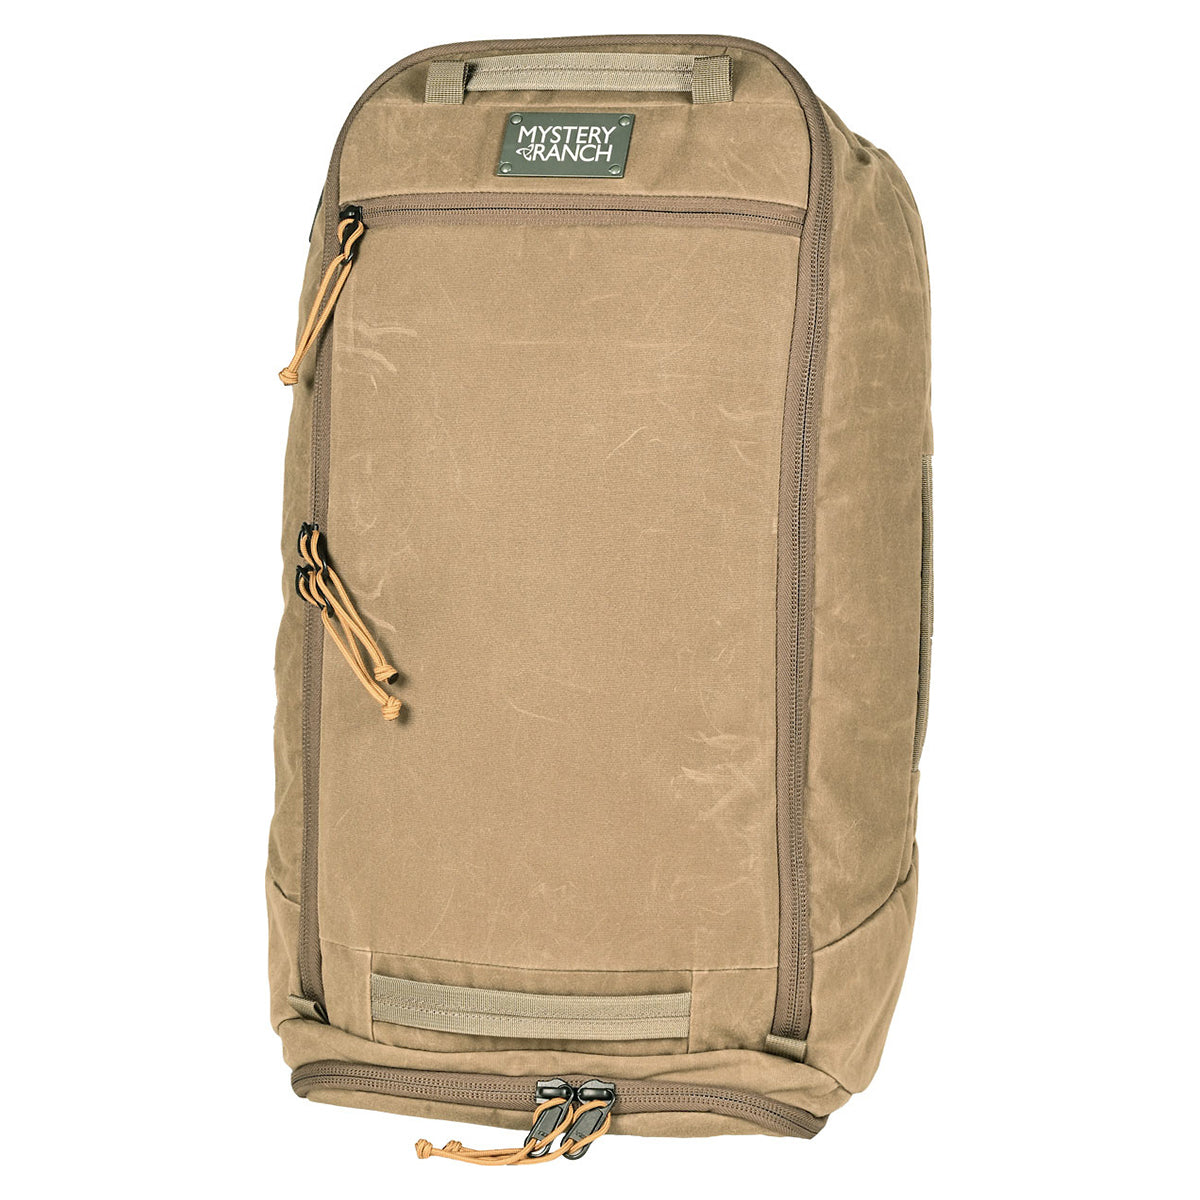 Mystery Ranch Mission 55L Duffel Bag in Mystery Ranch Mission 55L Duffel Bag (2020) by Mystery Ranch | Gear - goHUNT Shop by GOHUNT | Mystery Ranch - GOHUNT Shop